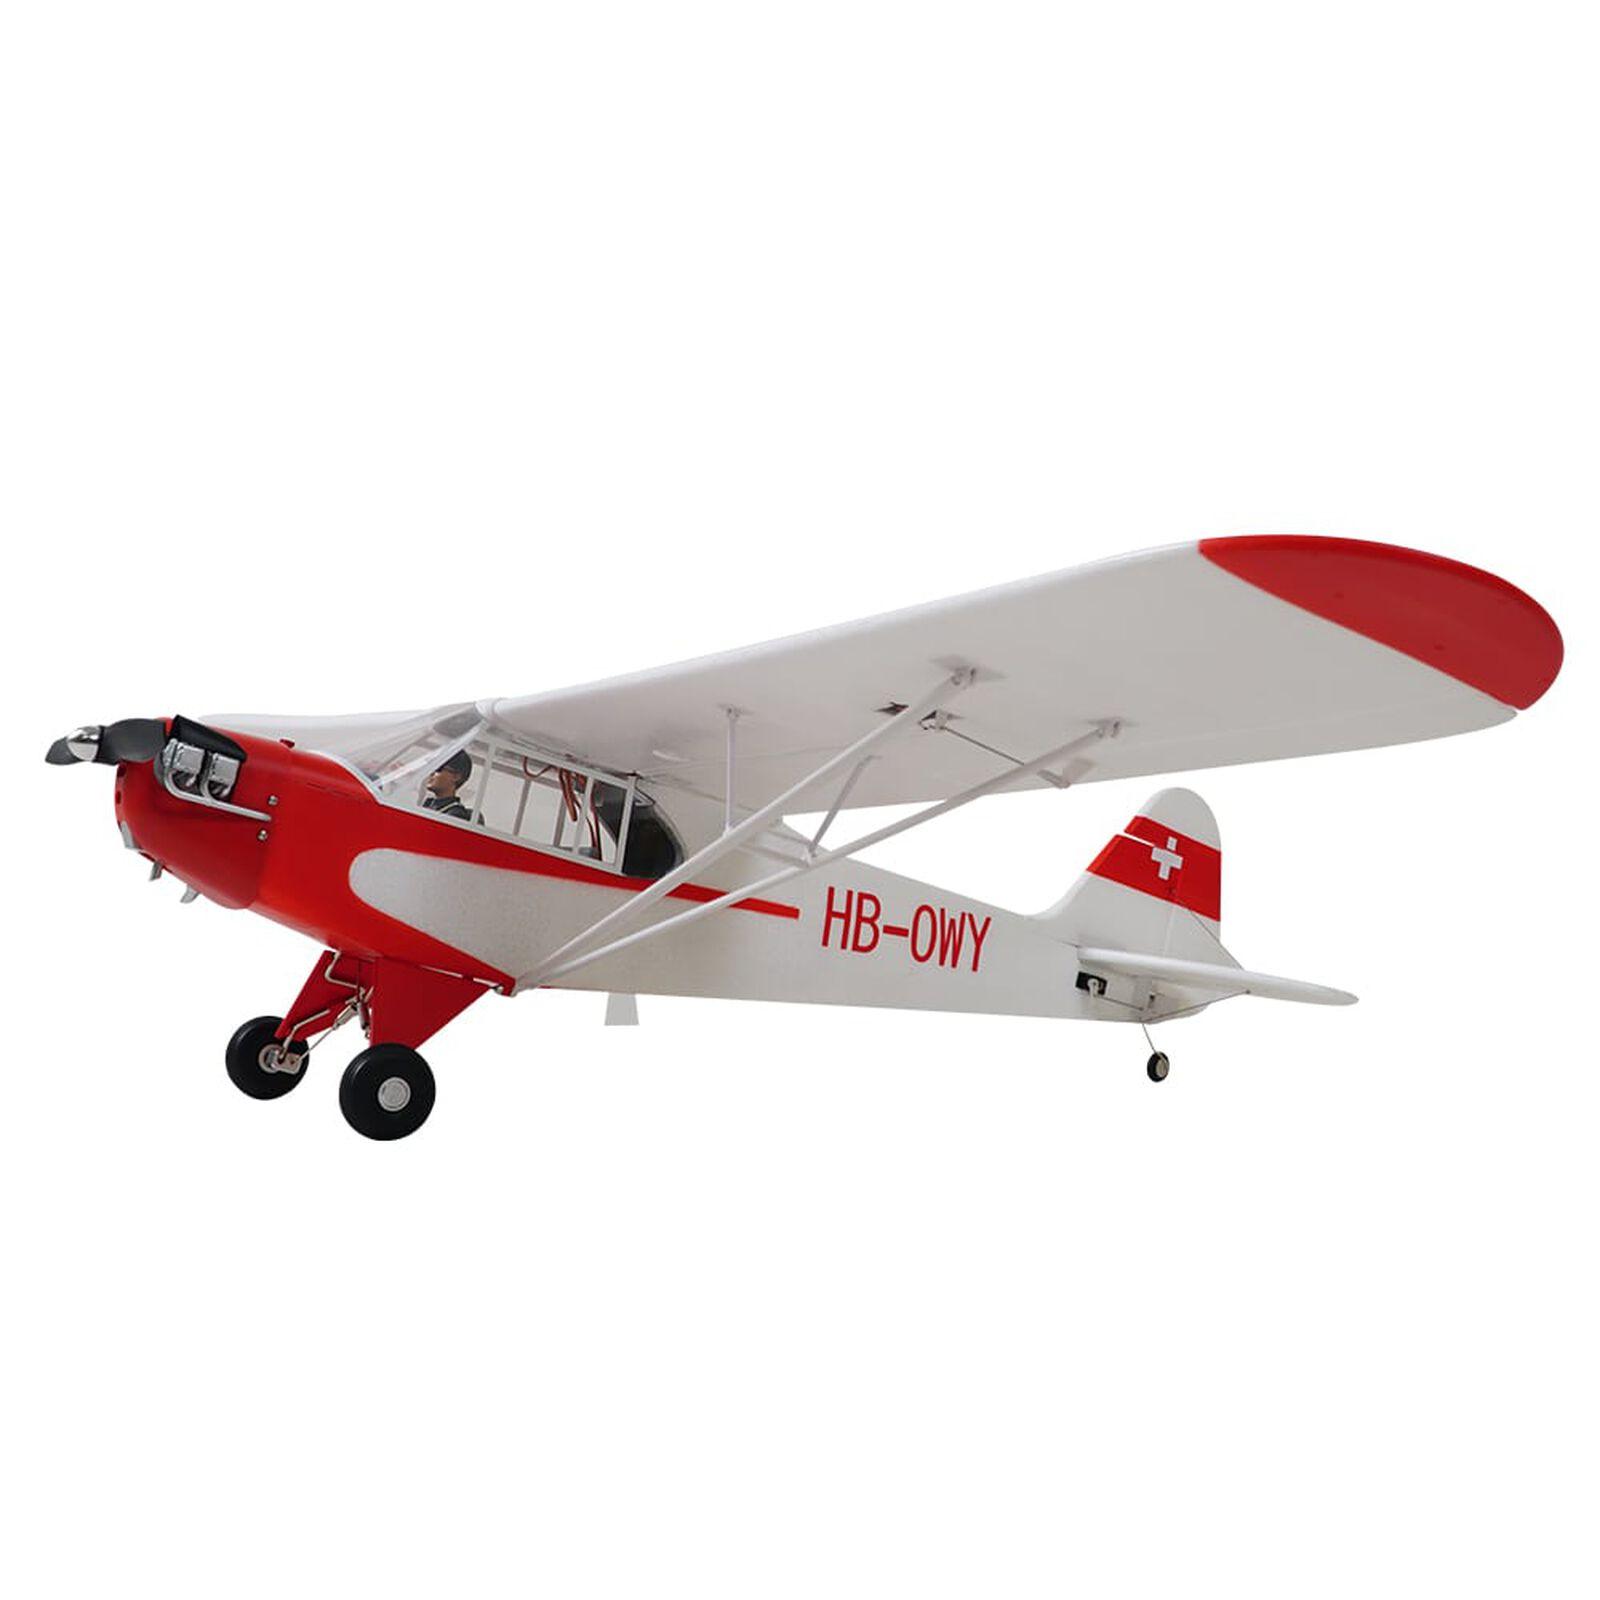 Piper J 3 Cub Rc Plane: Experience the Thrill of Flying a Classic Aircraft with the Piper J-3 Cub RC Plane.